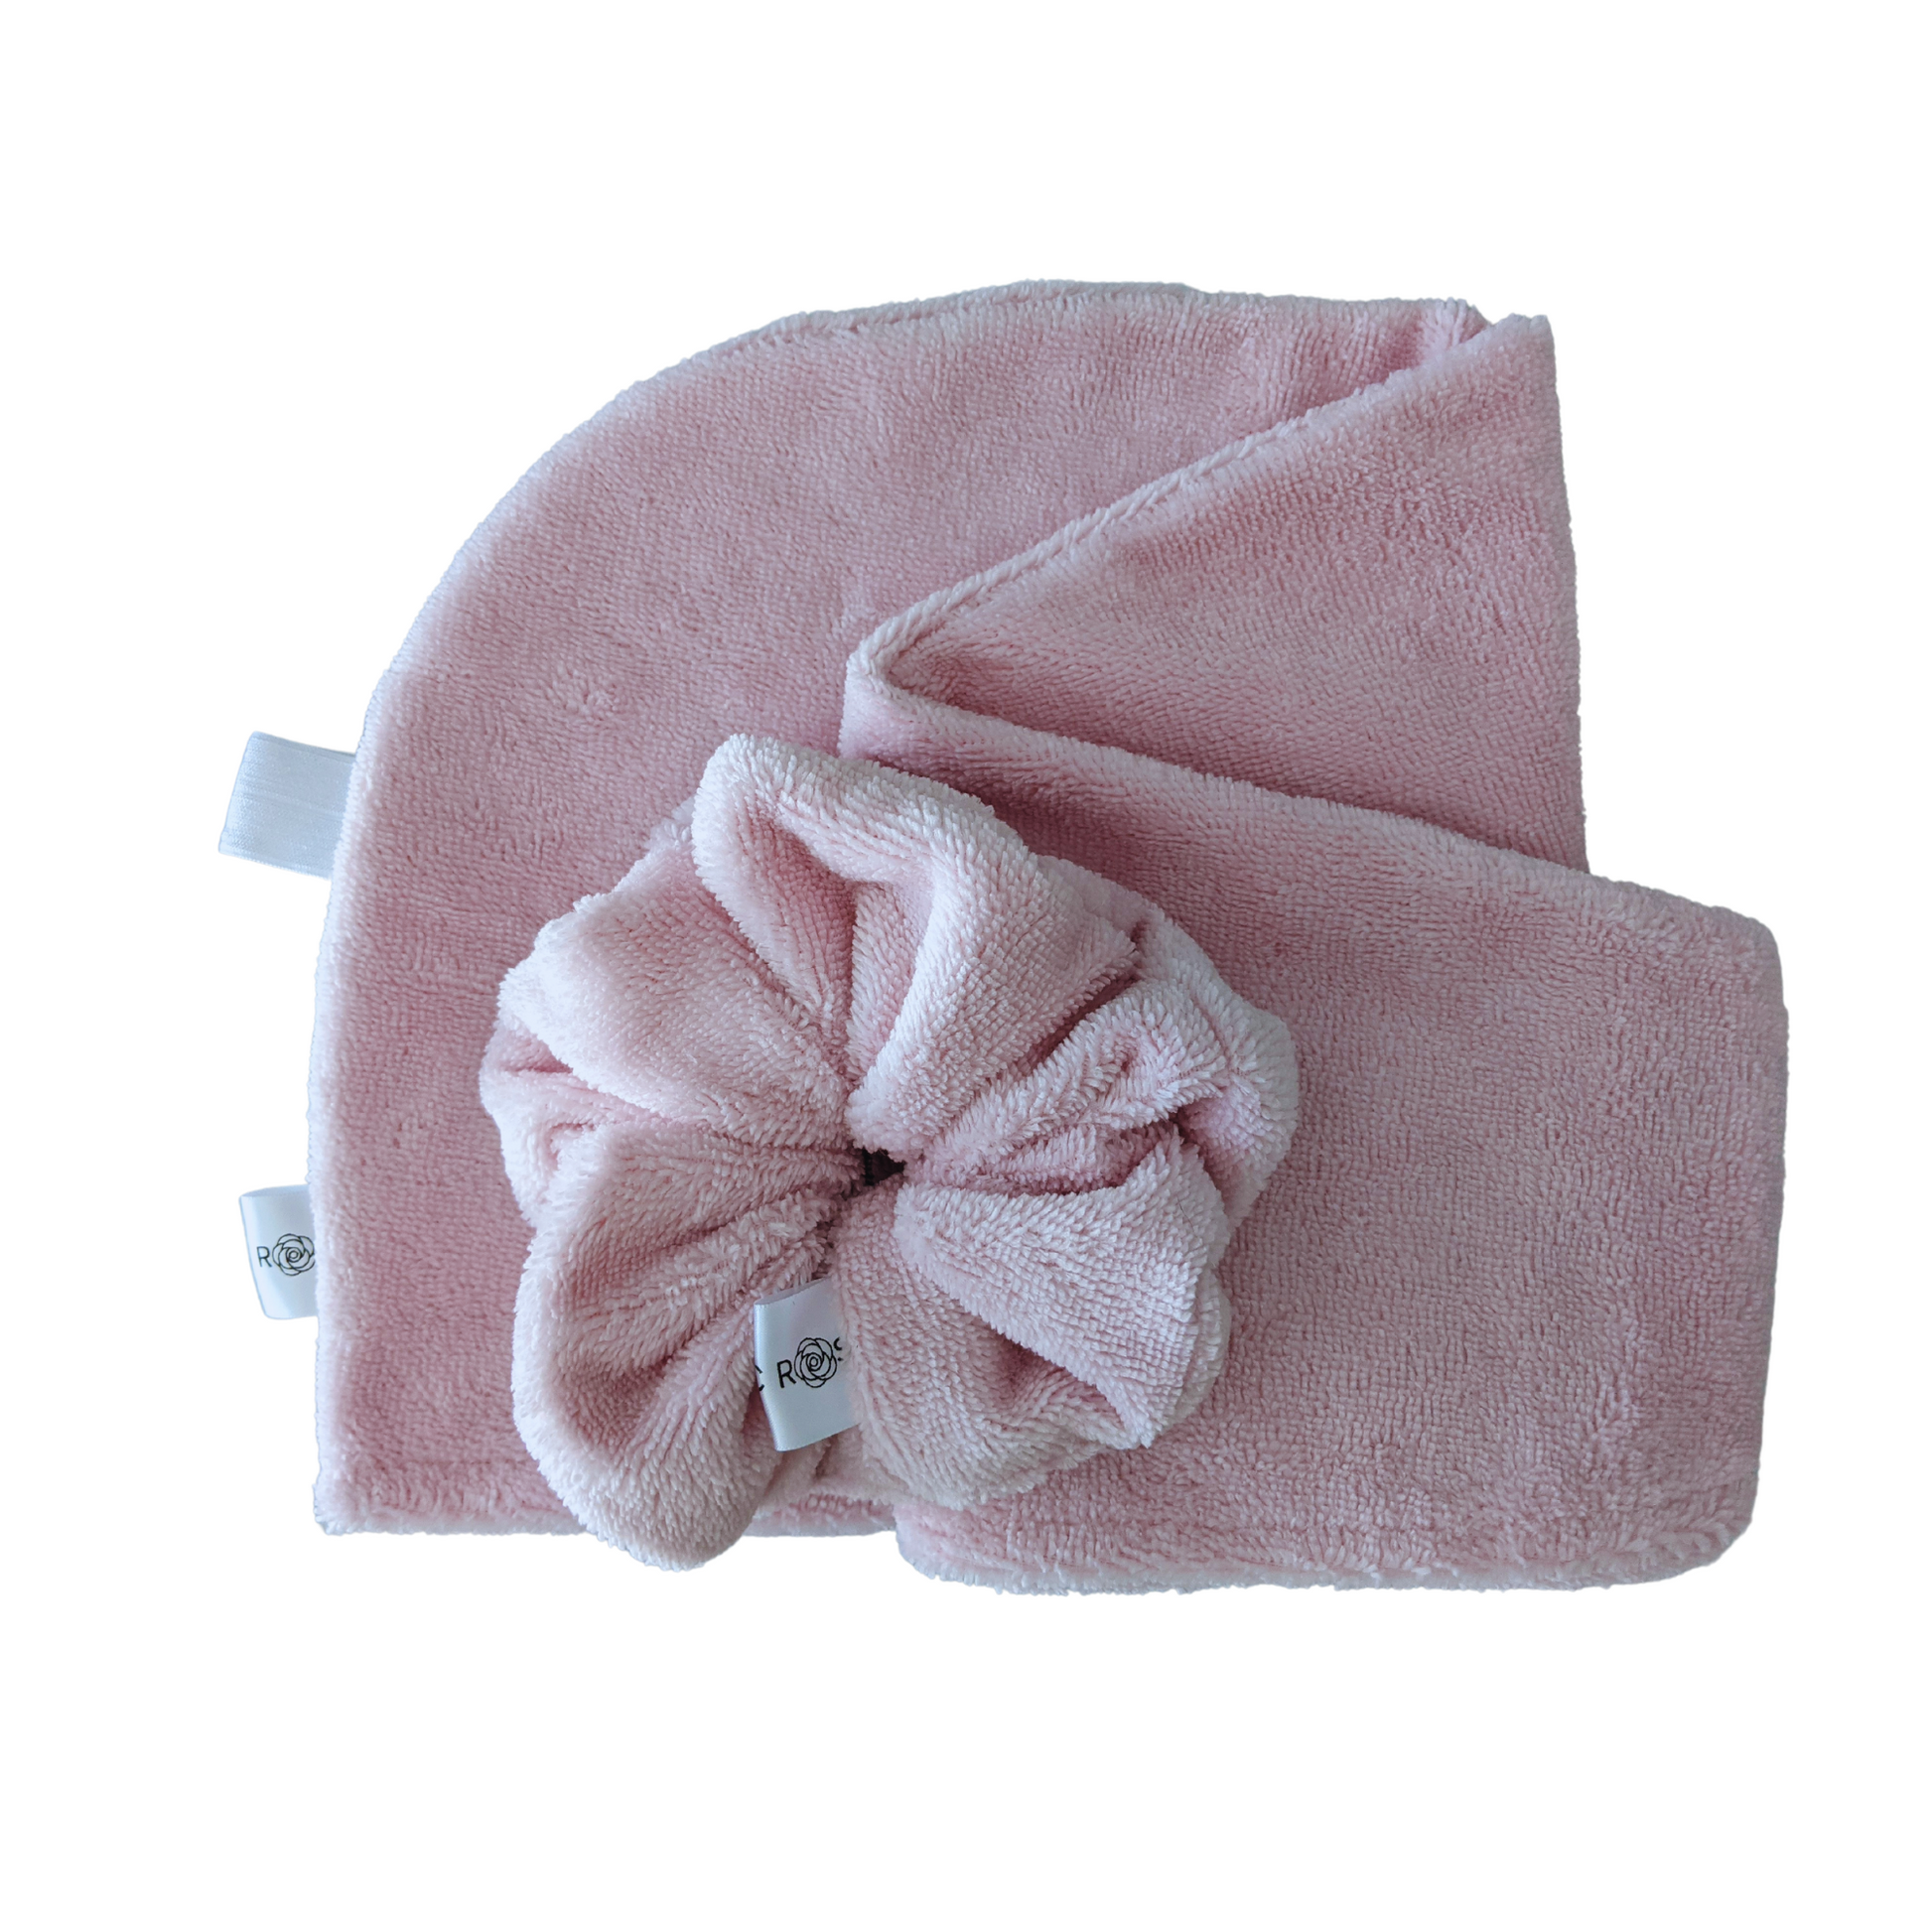 Blush pink hair drying towel and matching towel scrunchie, made in Canada